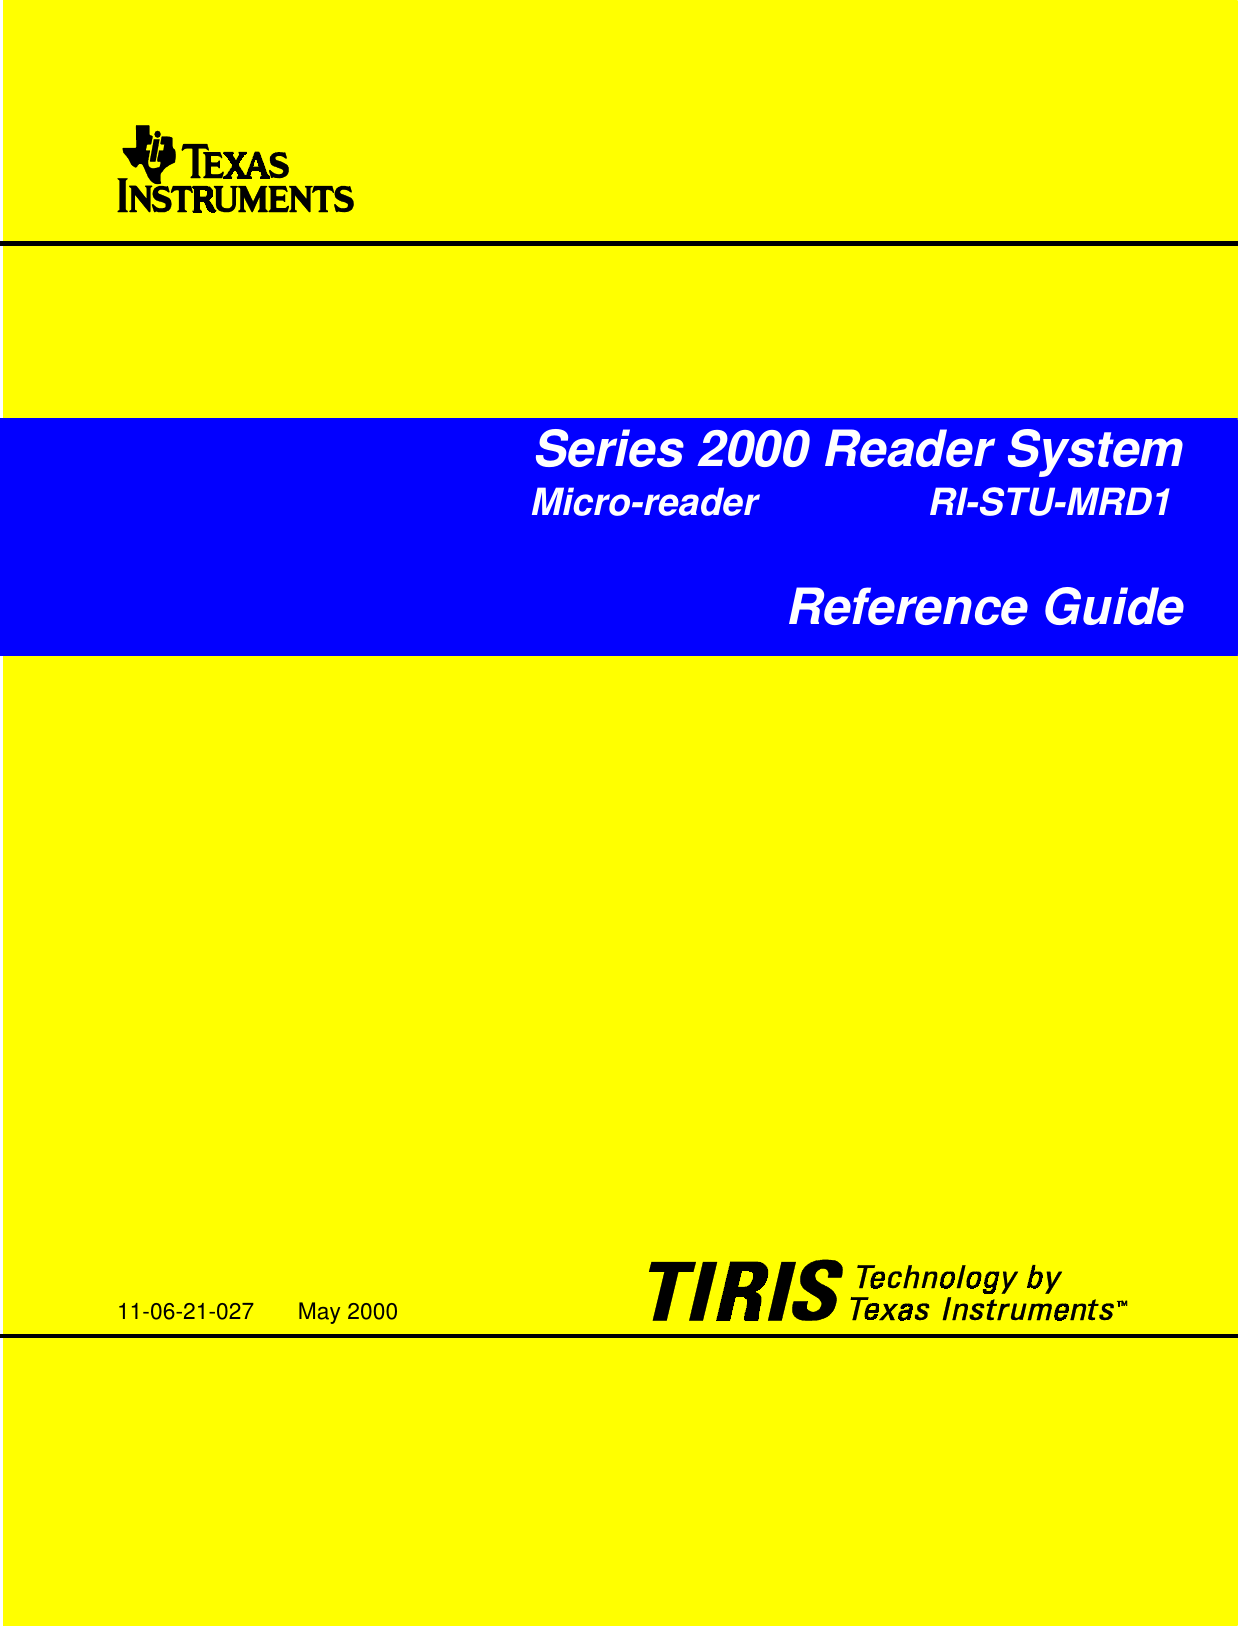 1May ’00 PrefaceSeries 2000 Reader SystemMicro-reader RI-STU-MRD1Reference Guide11-06-21-027 May 2000